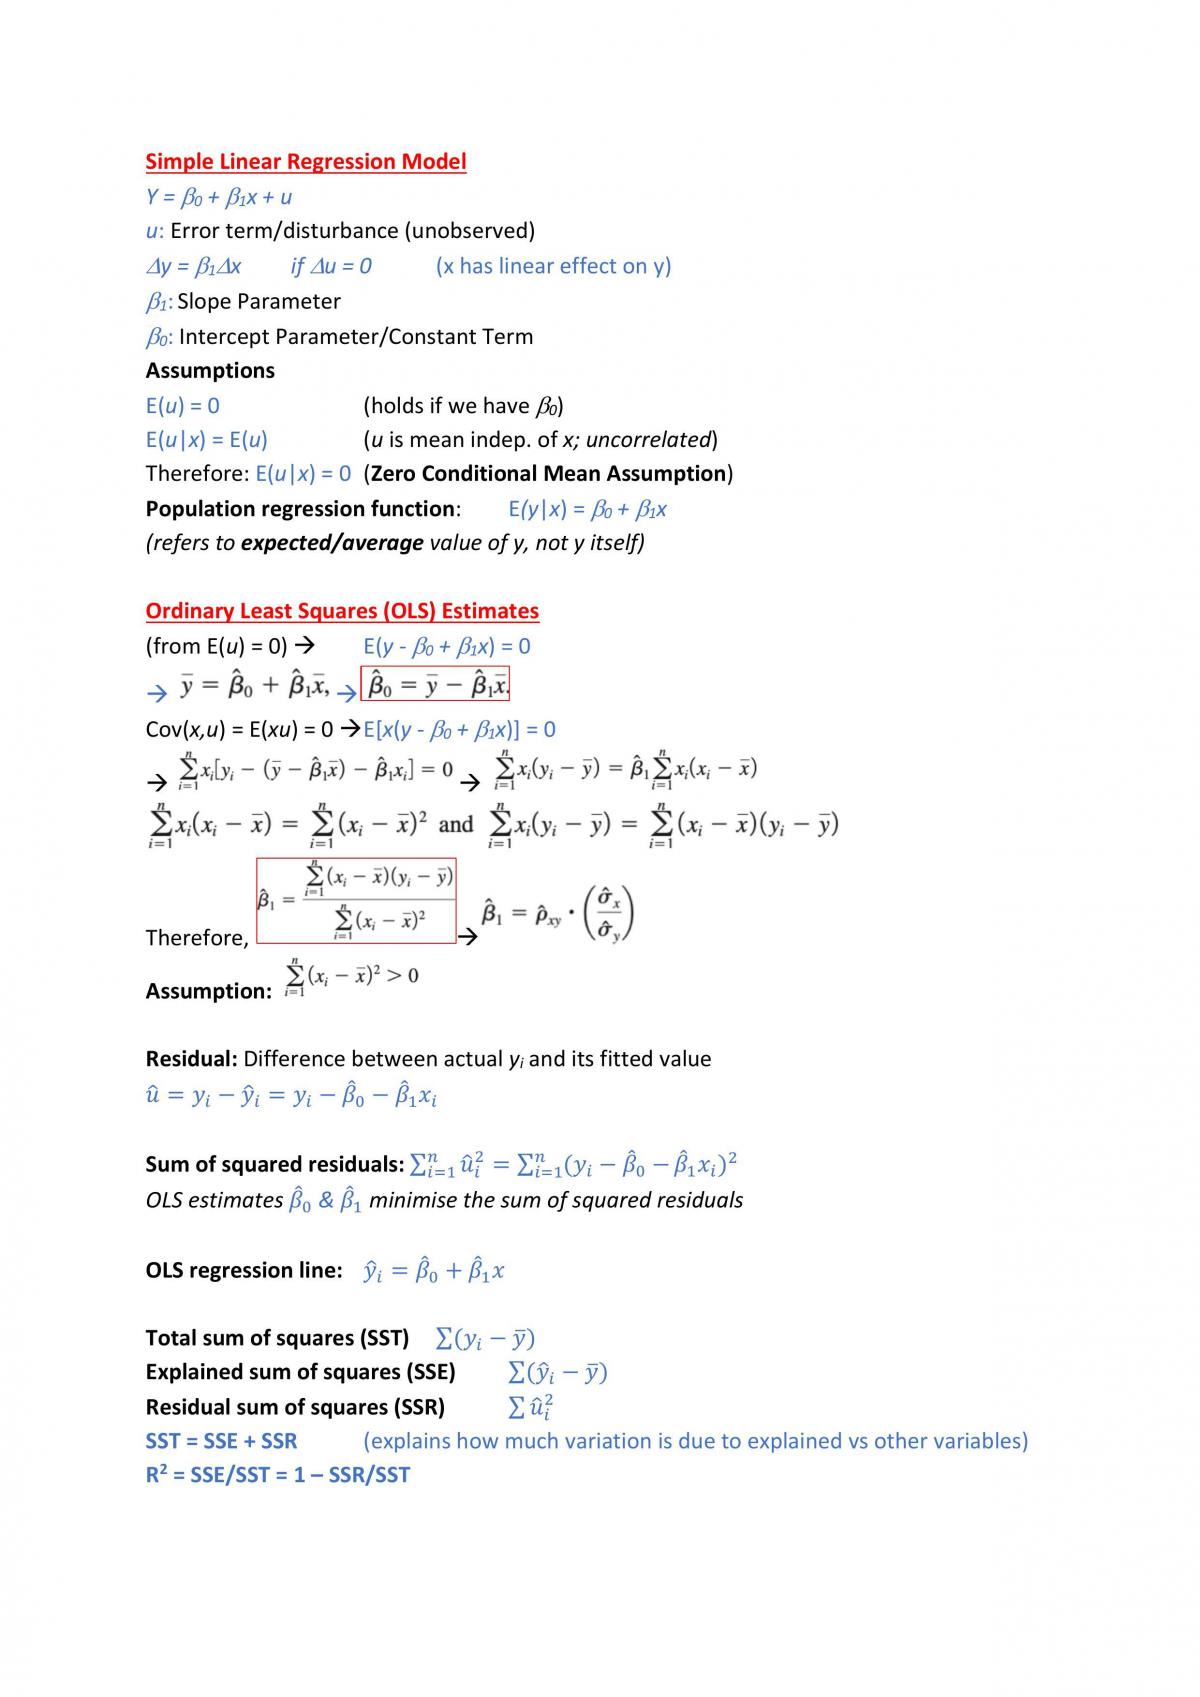 BSE3703 - Econometrics for Business I - Page 2